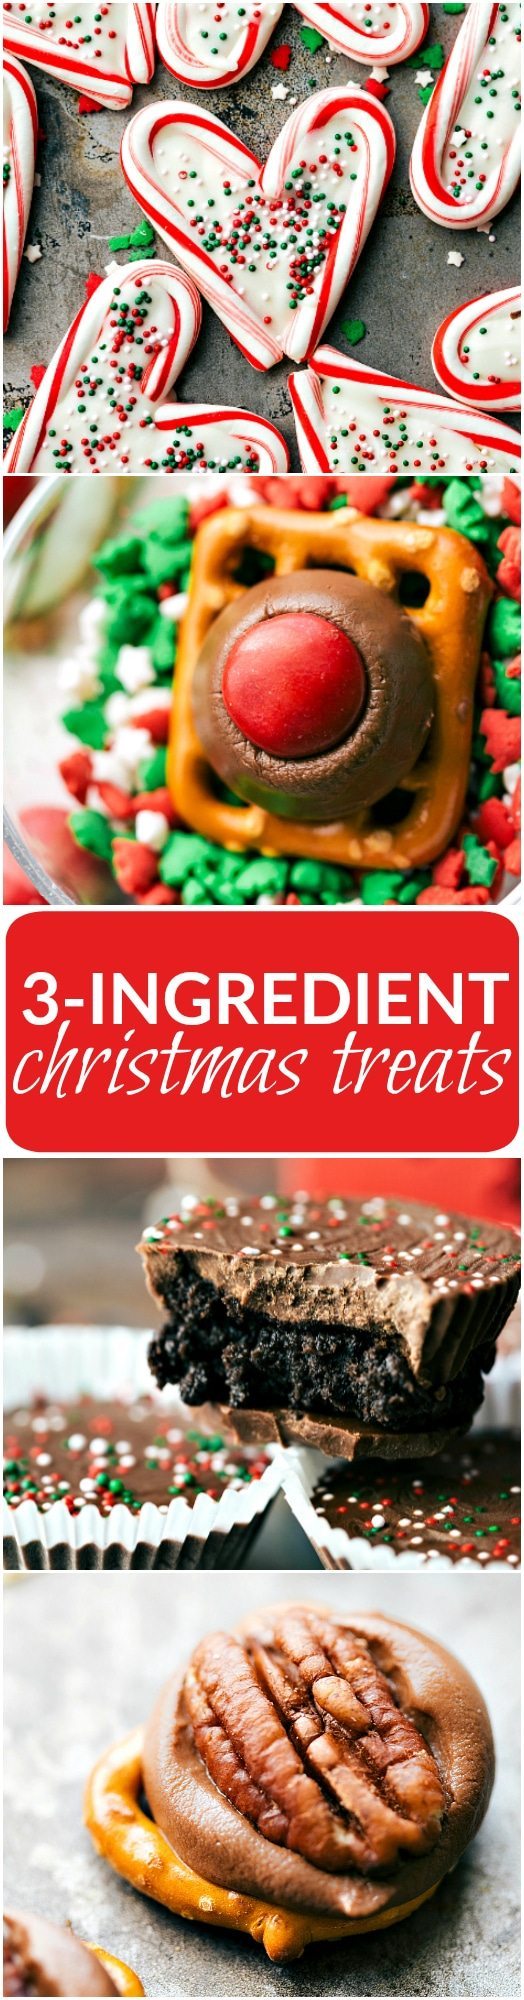 The BEST and easiest 3-ingredient Christmas treats -- perfect for giving to neighbors, bringing into work, taking to a party, or enjoying with your family! Homemade white chocolate peppermint hearts, pretzel hug/kiss bites, thin mint oreo cups, and easy turtles. FOUR recipes via chelseasmessyapron.com